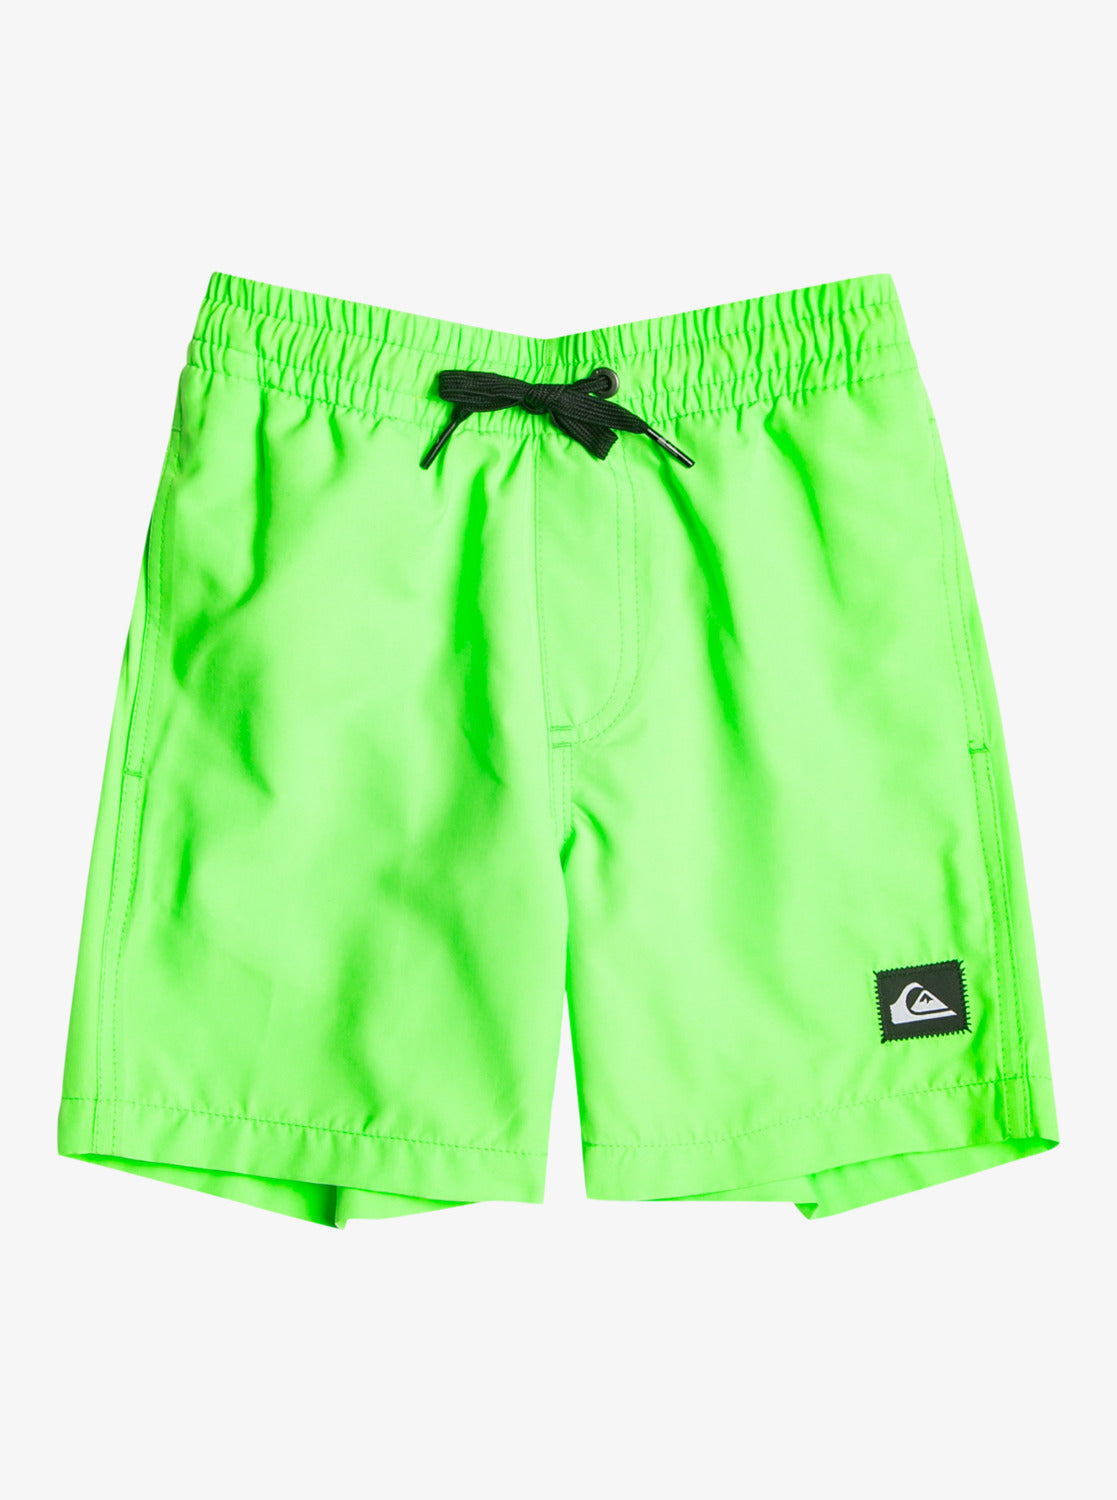 Quiksilver Youth Everyday Volleys - Green Gecko